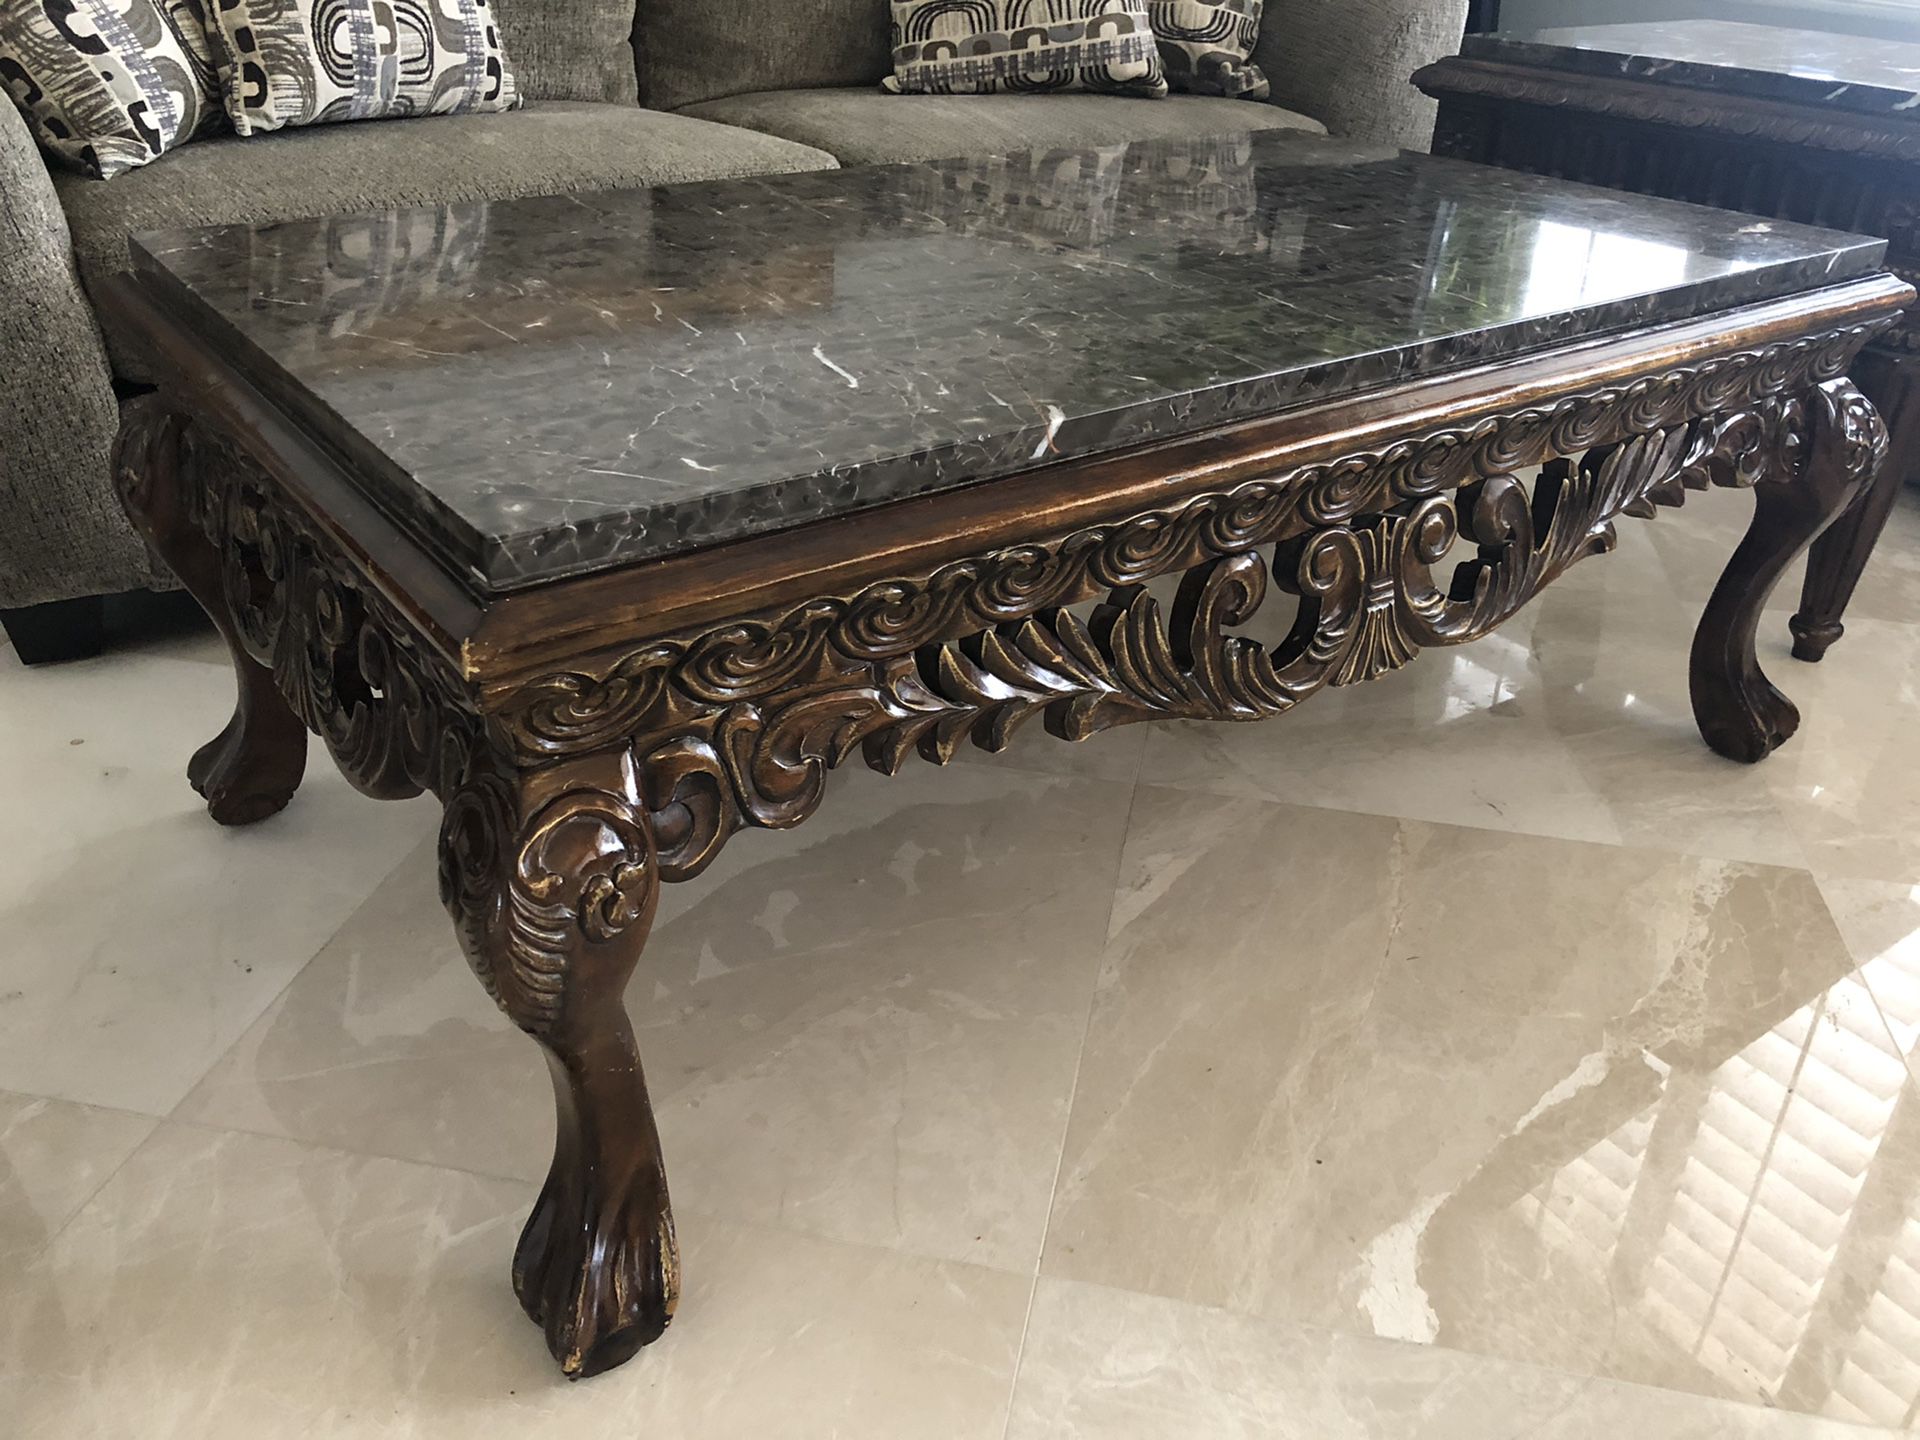 Elegant marble coffee table set for Sale in Glendale, AZ - OfferUp